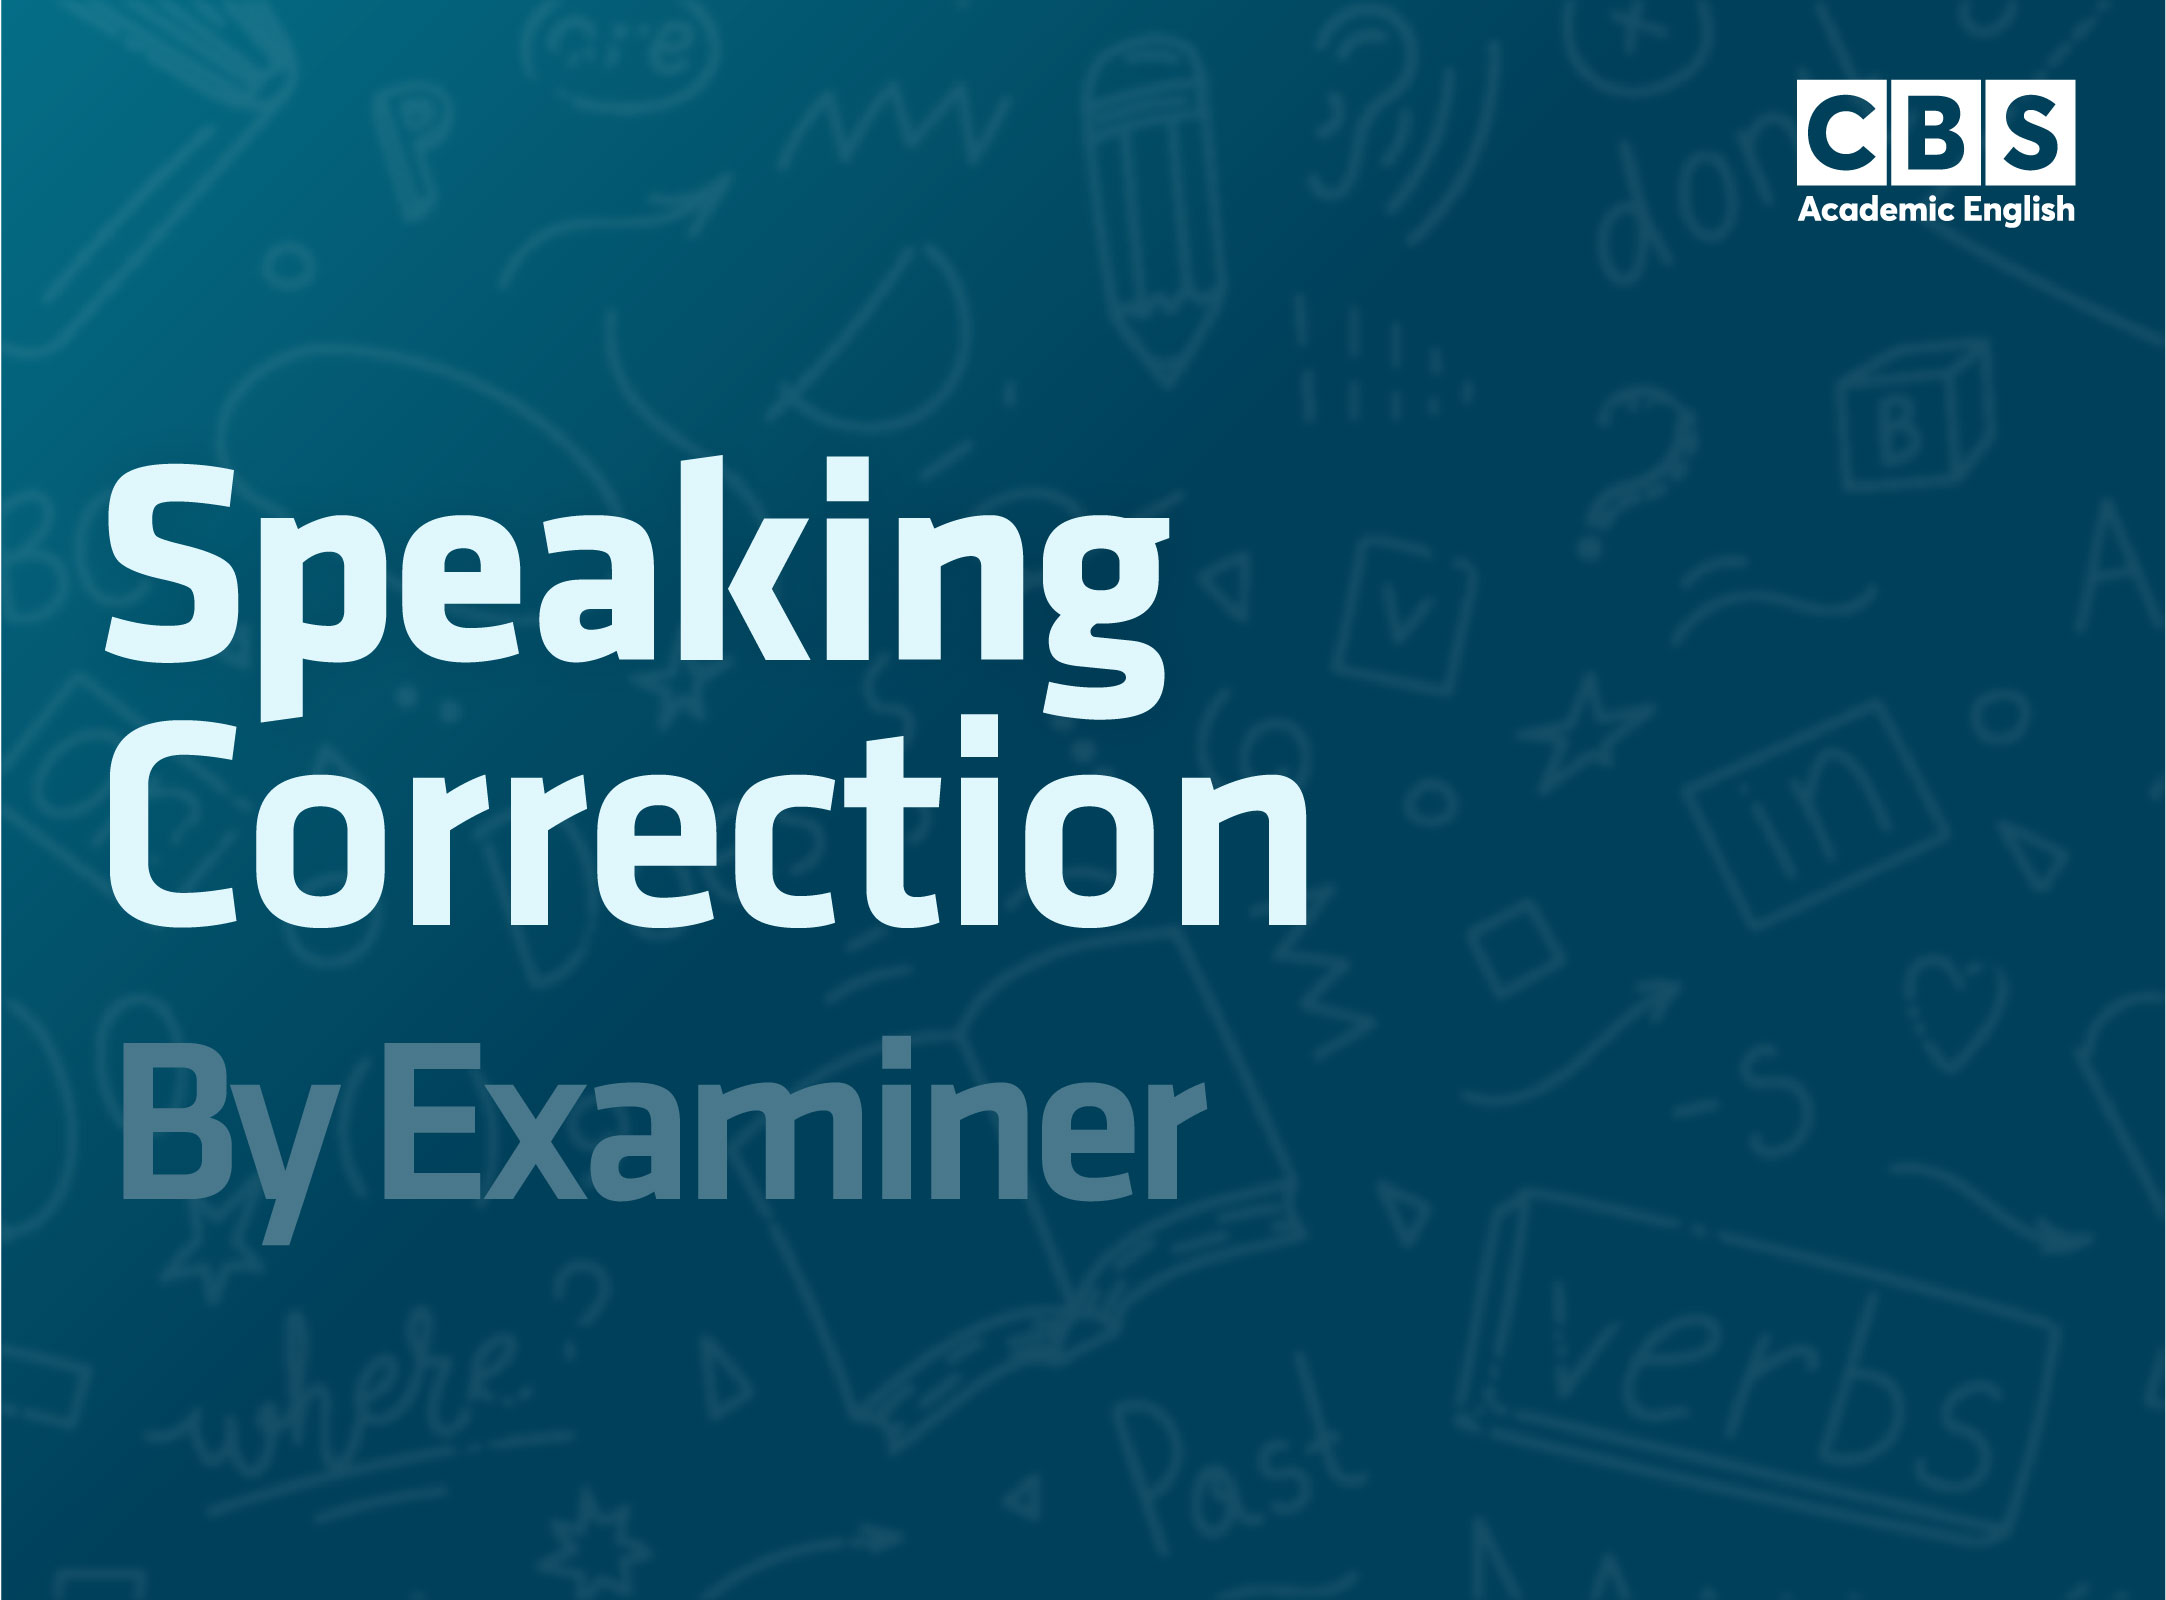 SPEAKING CORRECTION BY EXAMINER